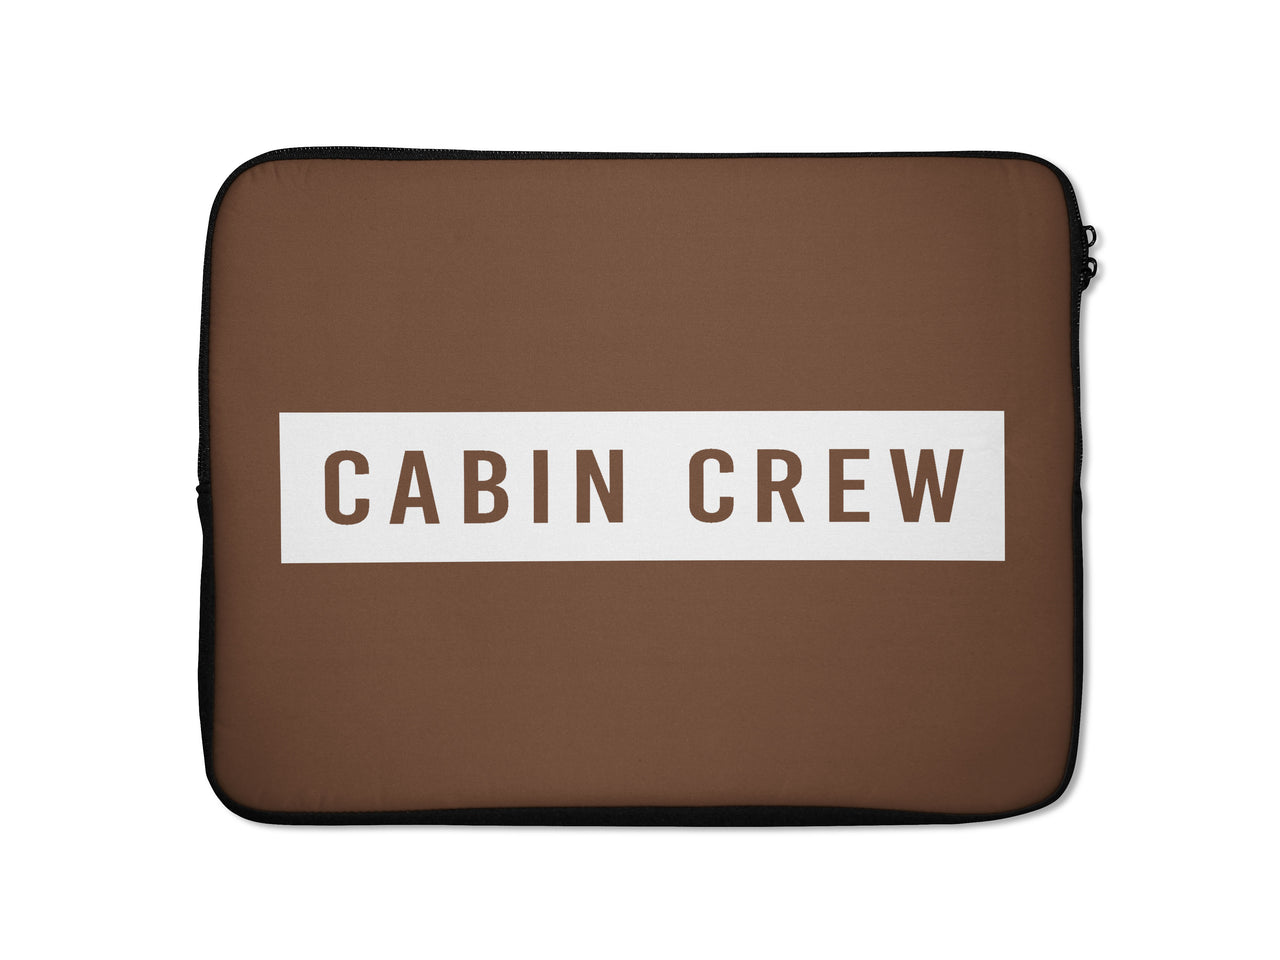 Cabin Crew Text Designed Laptop & Tablet Cases